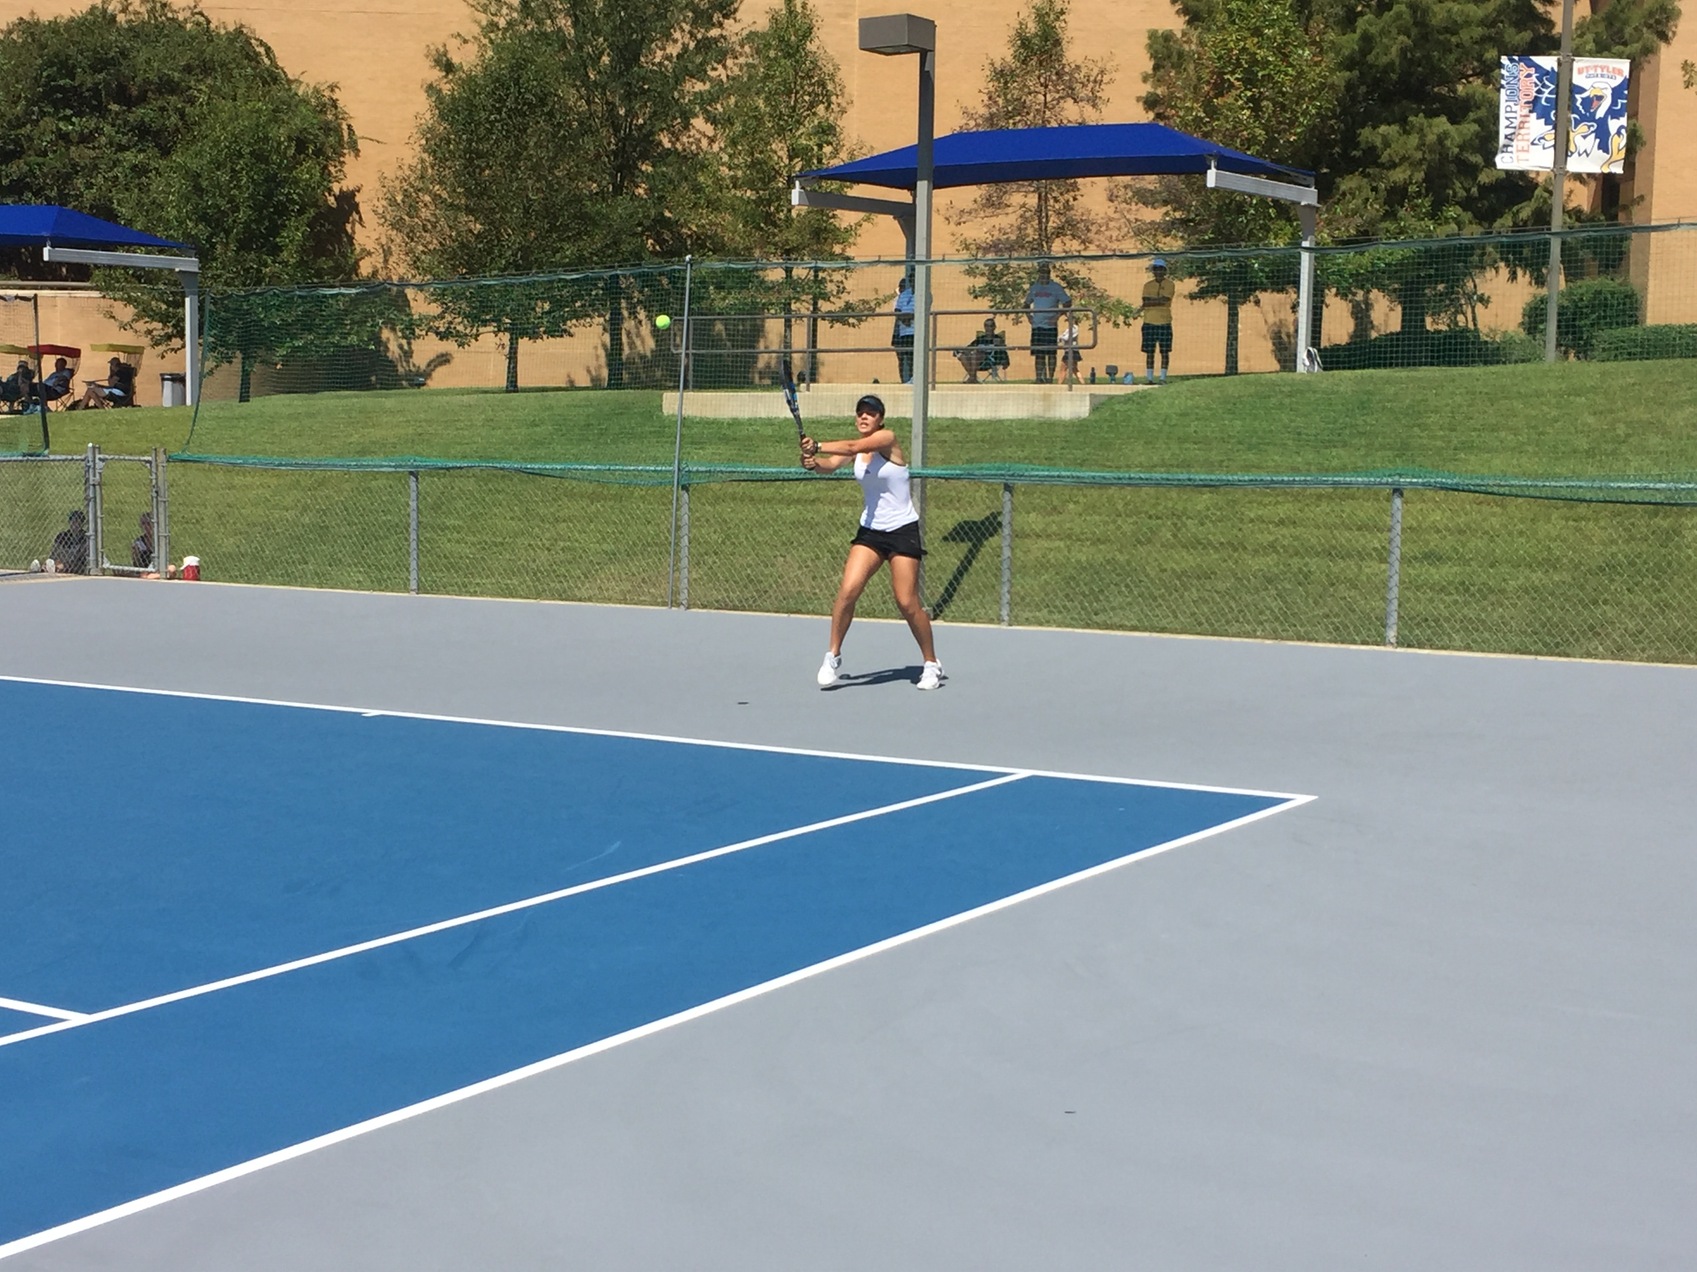 Colby Mules Defeat Women’s Tennis 5-4 in SCAC/NESCAC Showdown